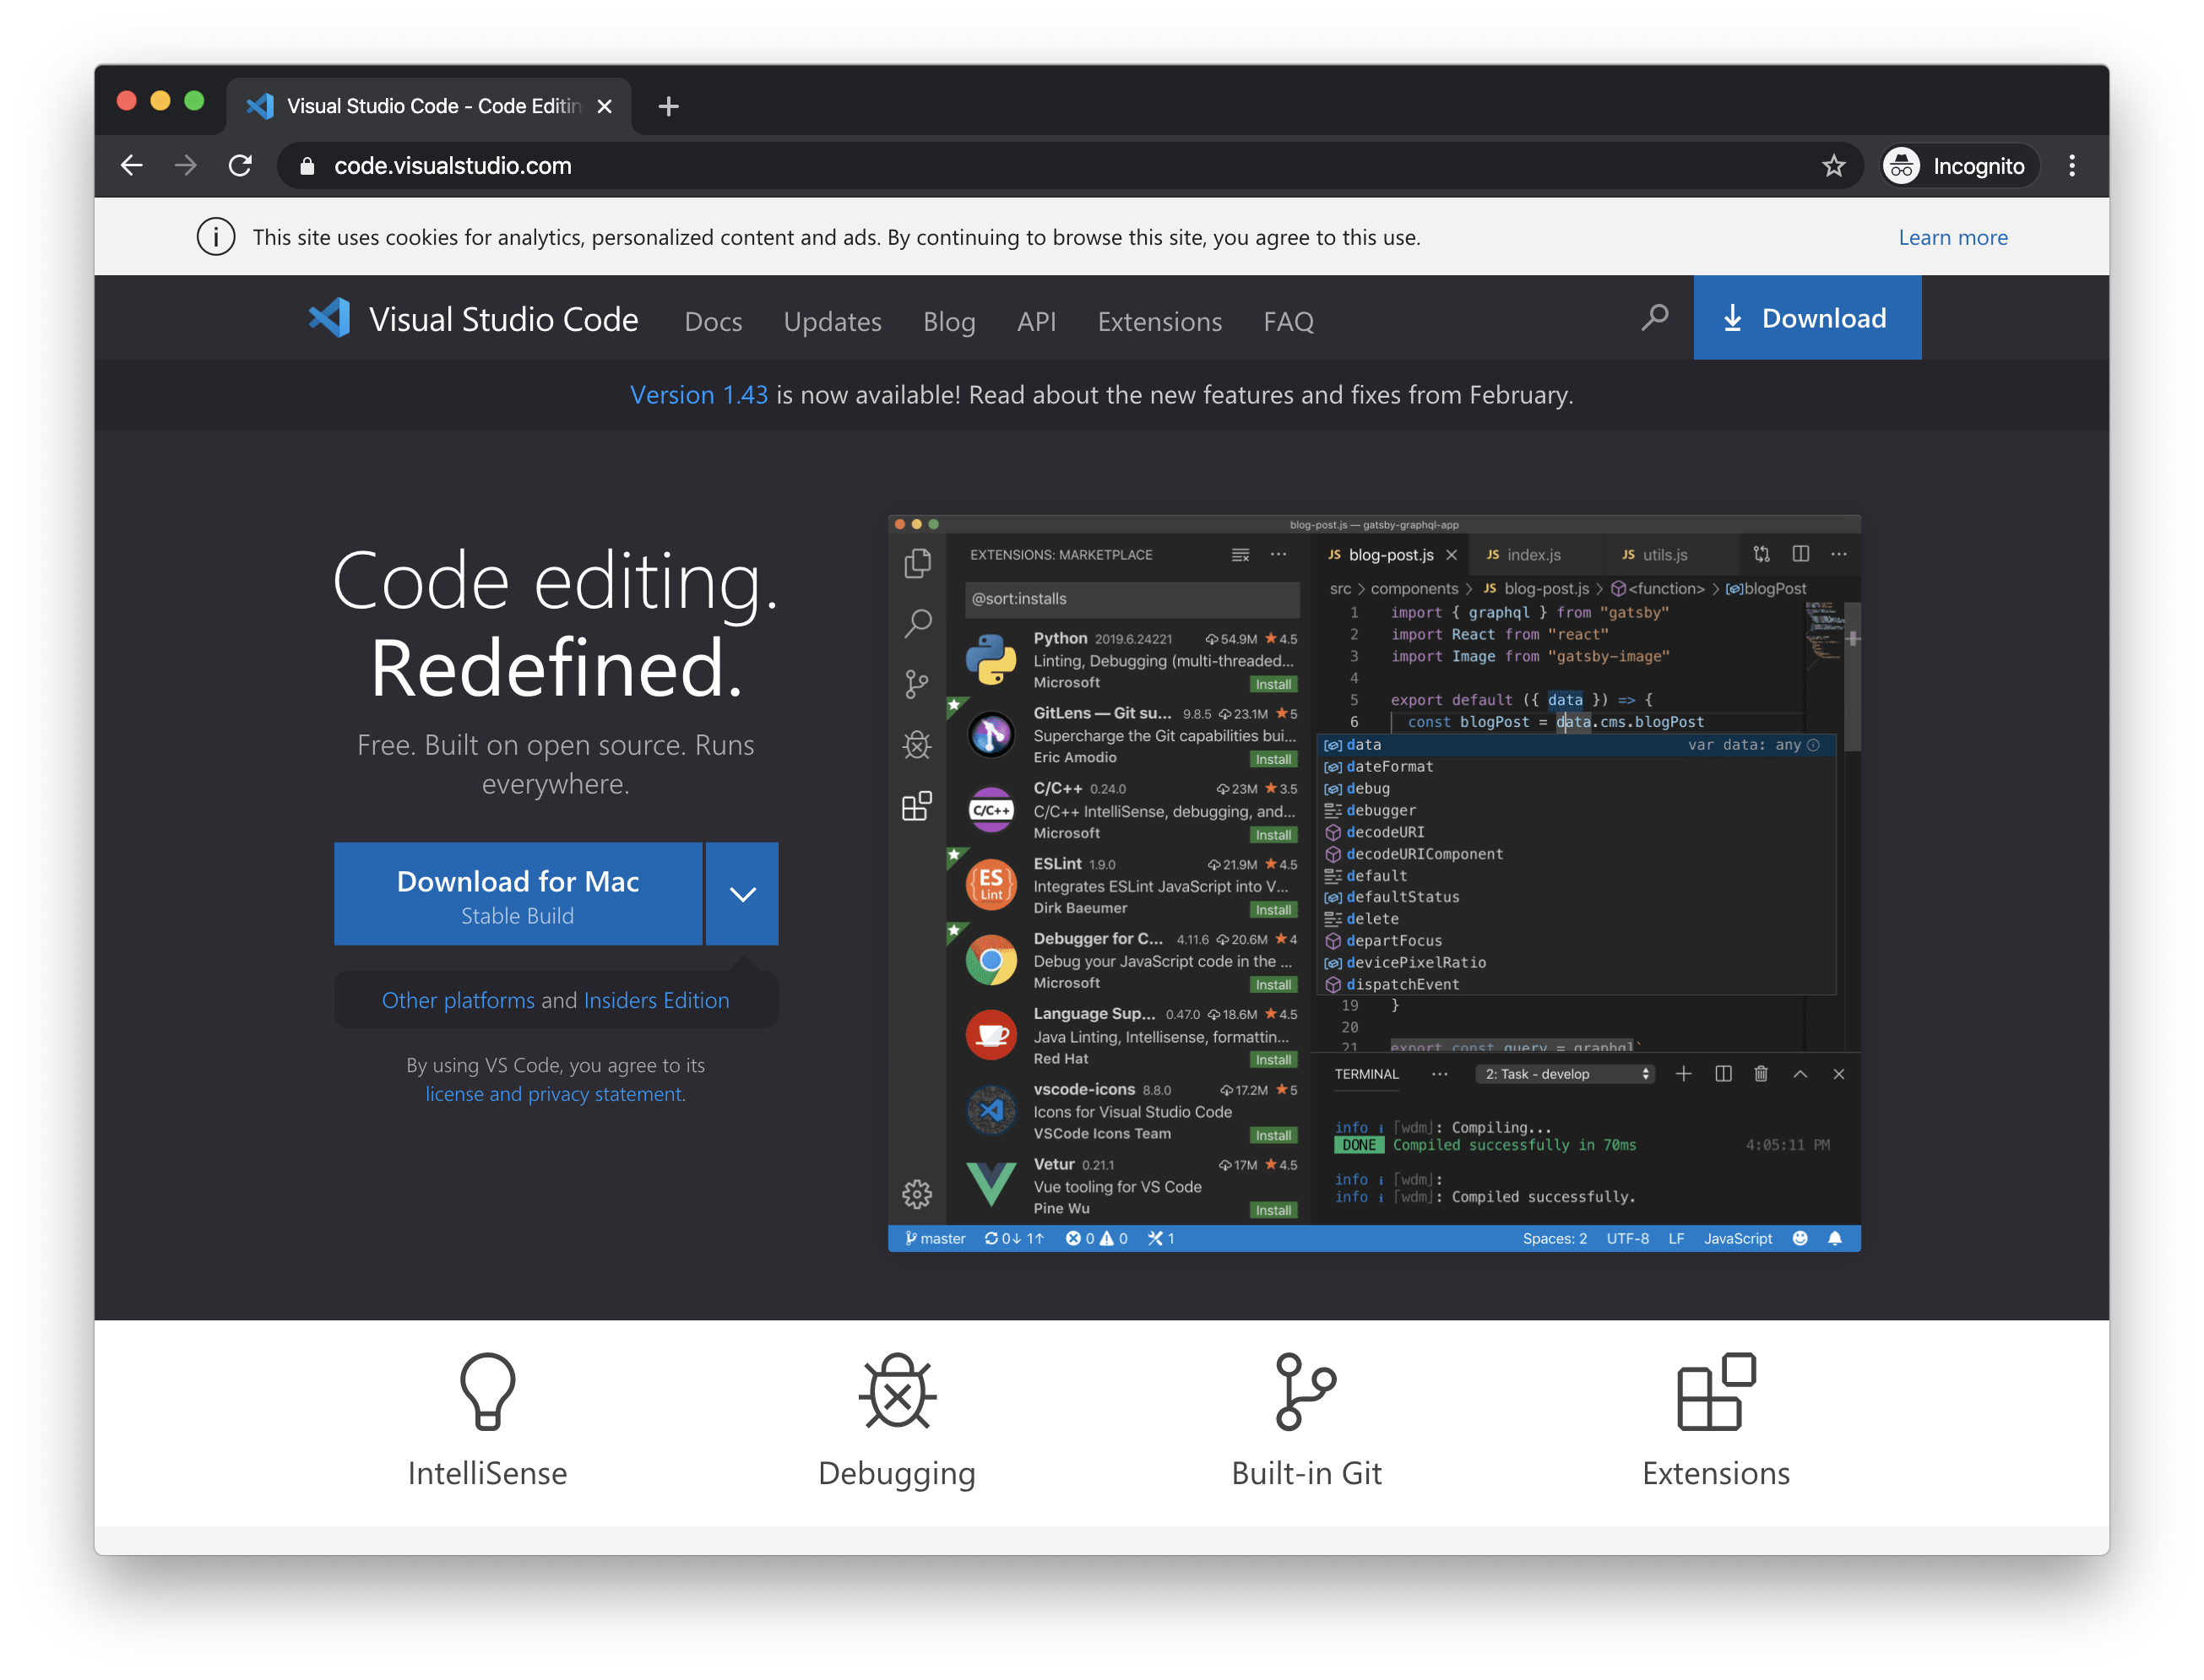 The VSCode homepage